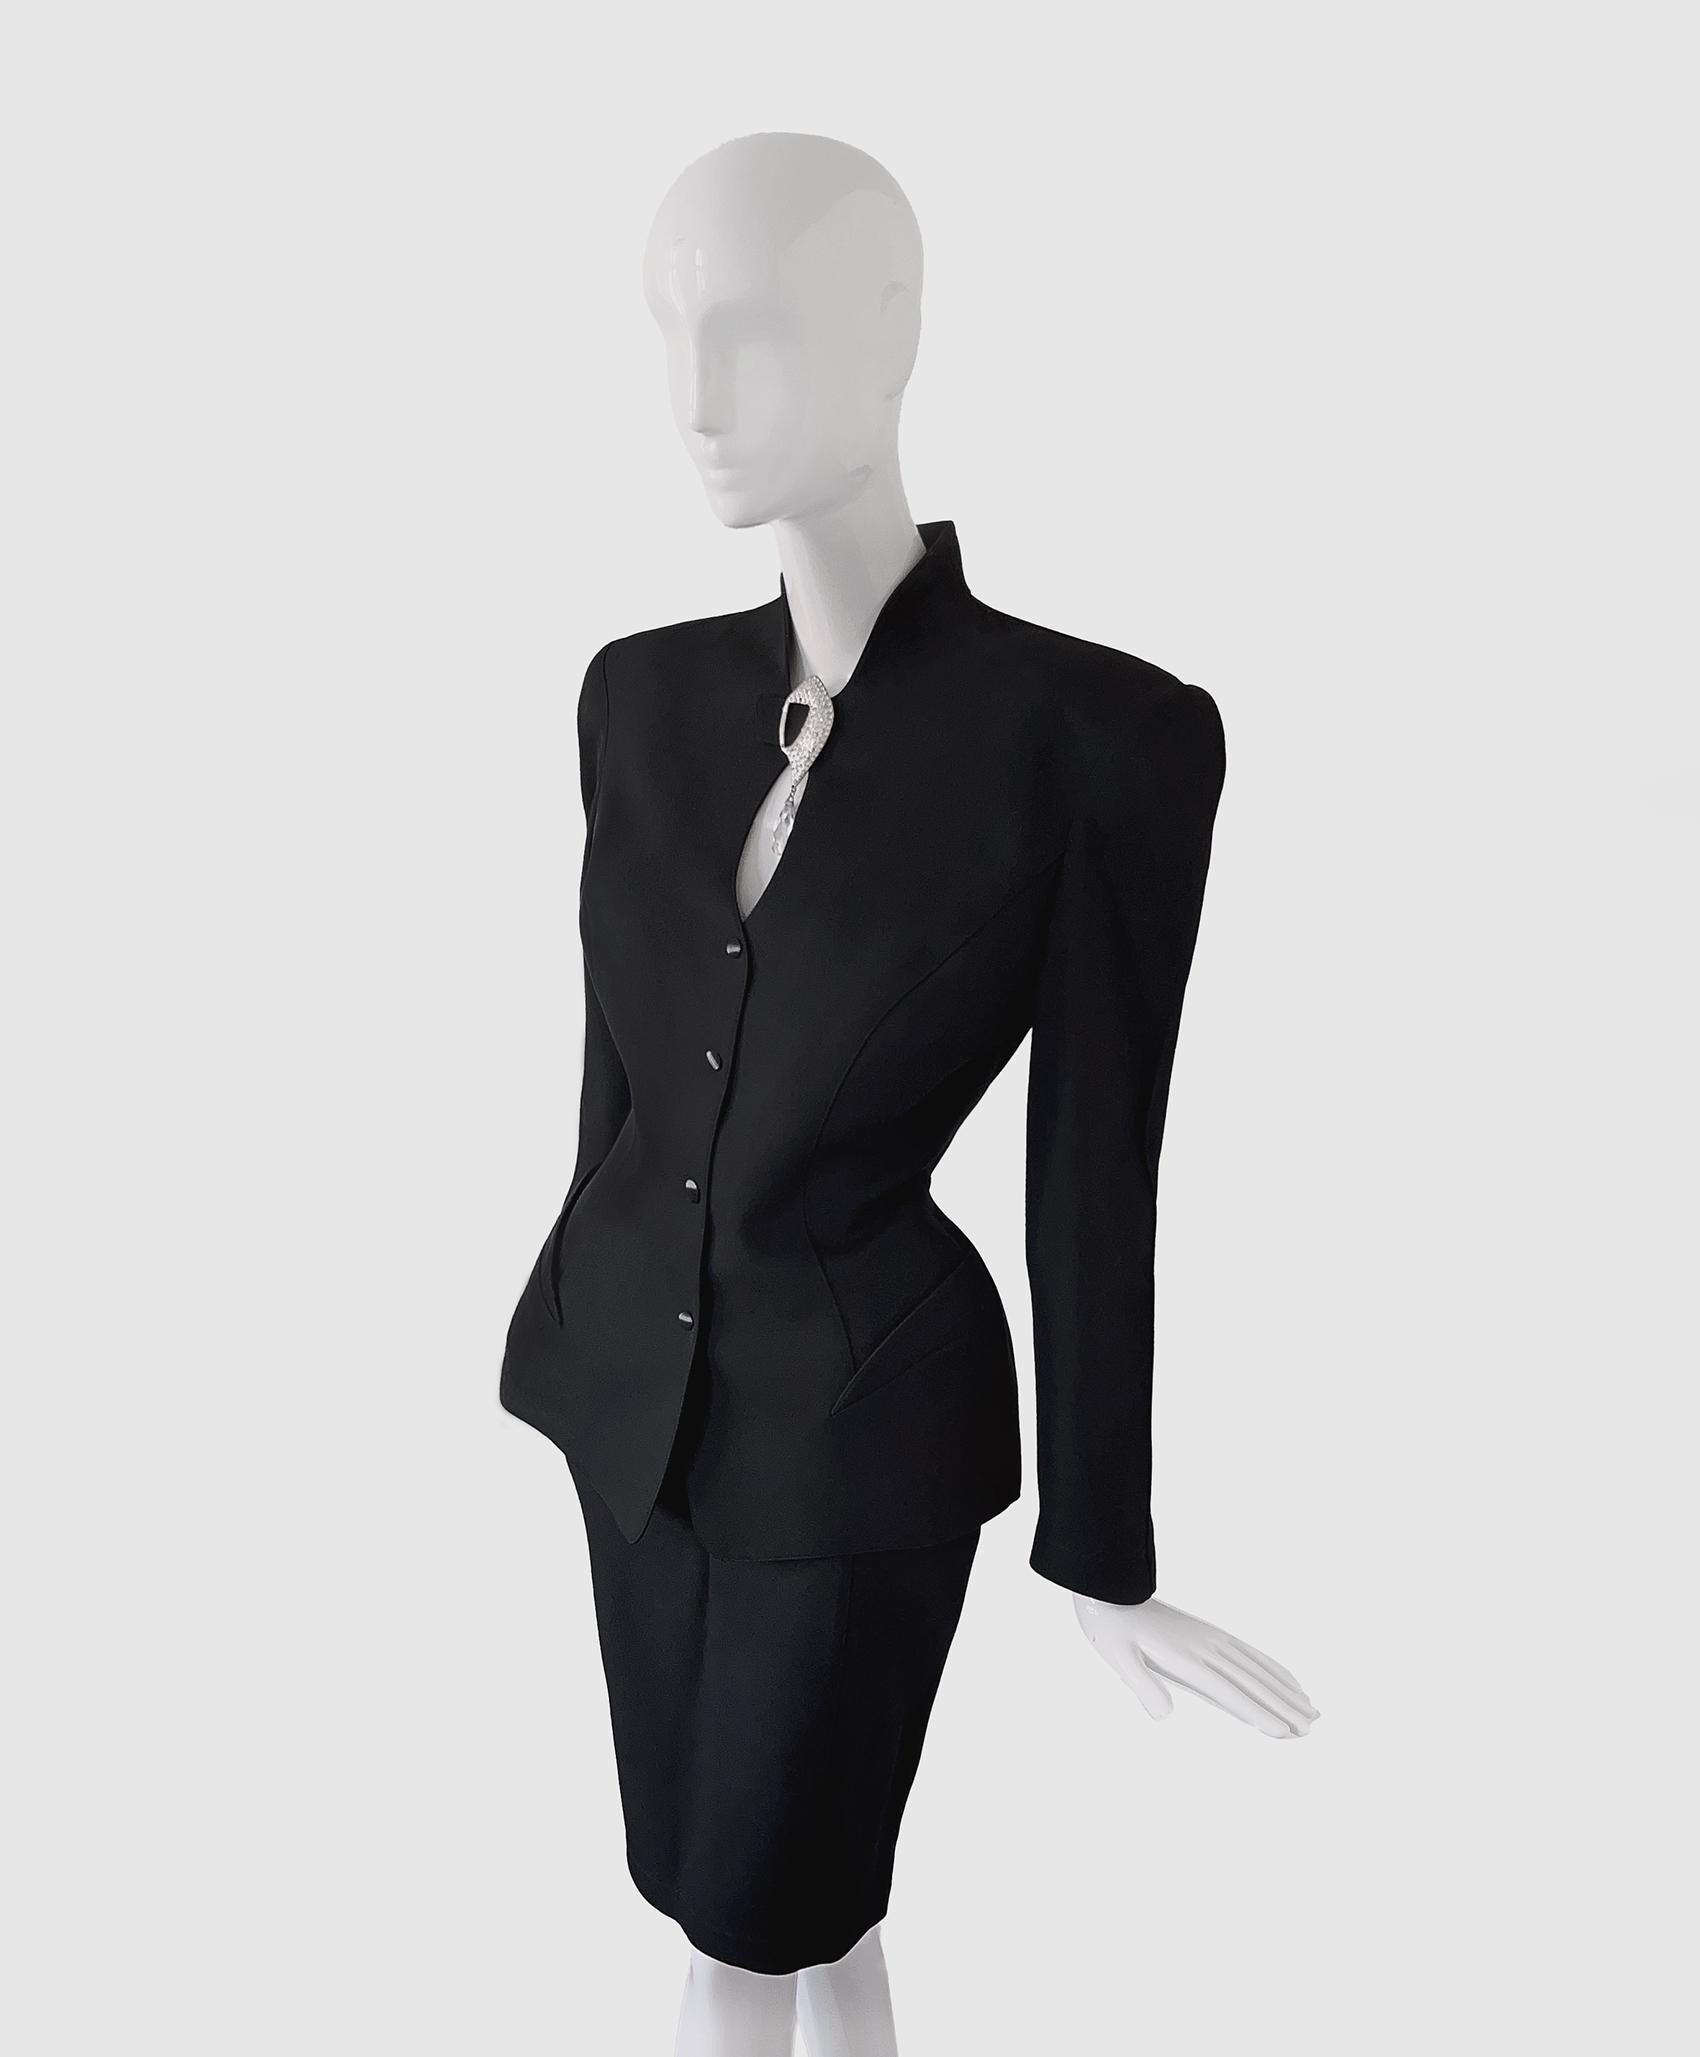 
Extremely rare and glamorous Thierry Mugler Ensemble. A stunning creation of the one and only Manfred Thierry Mugler, early 90s Collection.
Gorgeous super feminine blazer jacket with fitted waist, strong shoulders and amazing high collar with